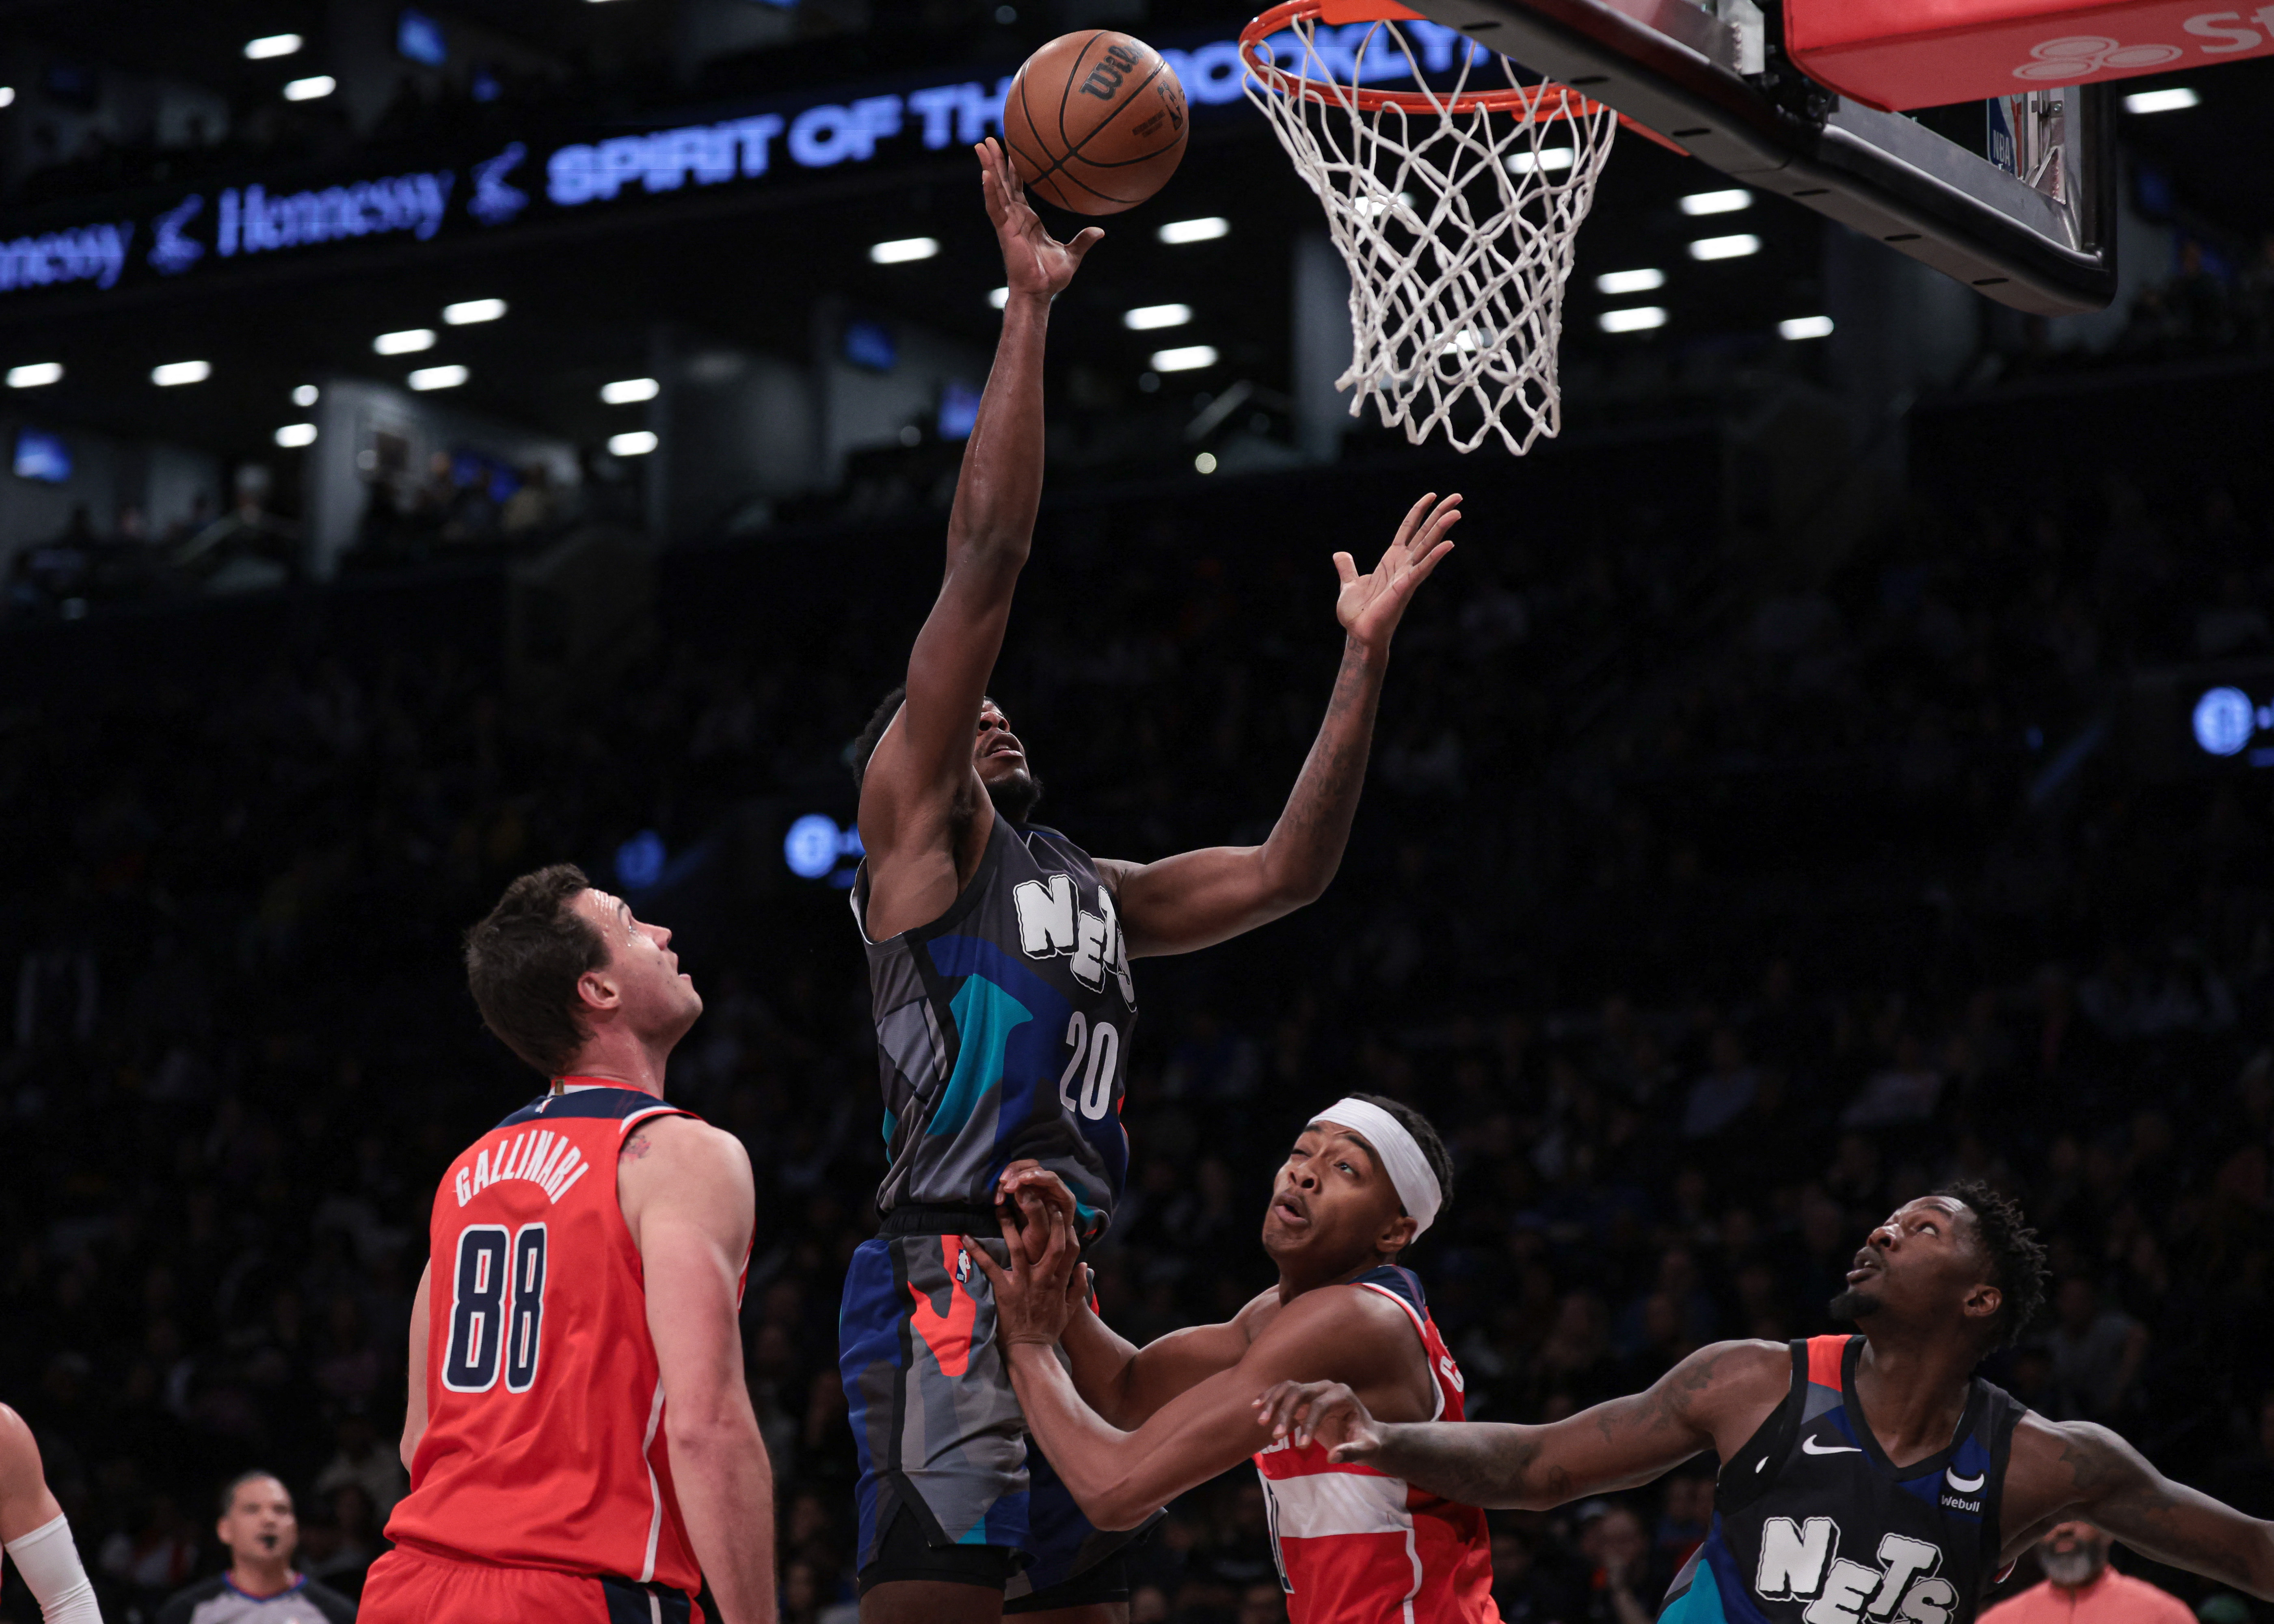 Nets survive late-game scare in wi over Washington Wizards